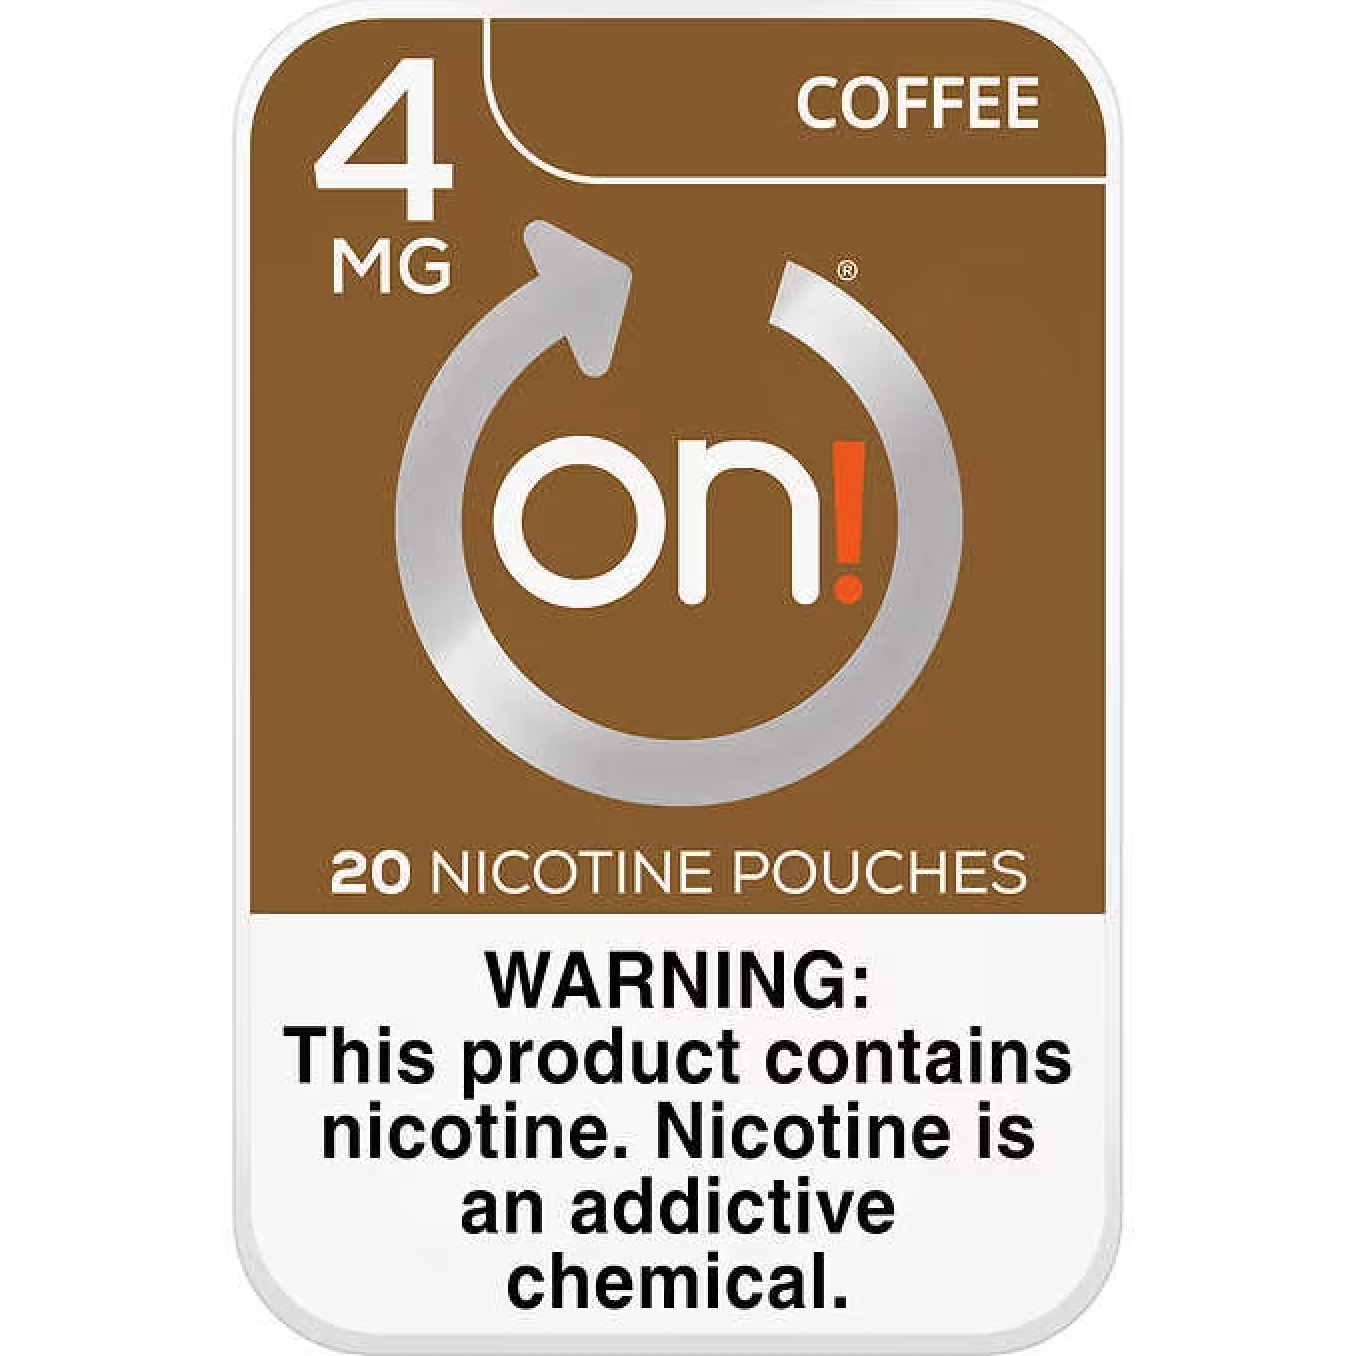 ON! Nicotine Pouches Coffee